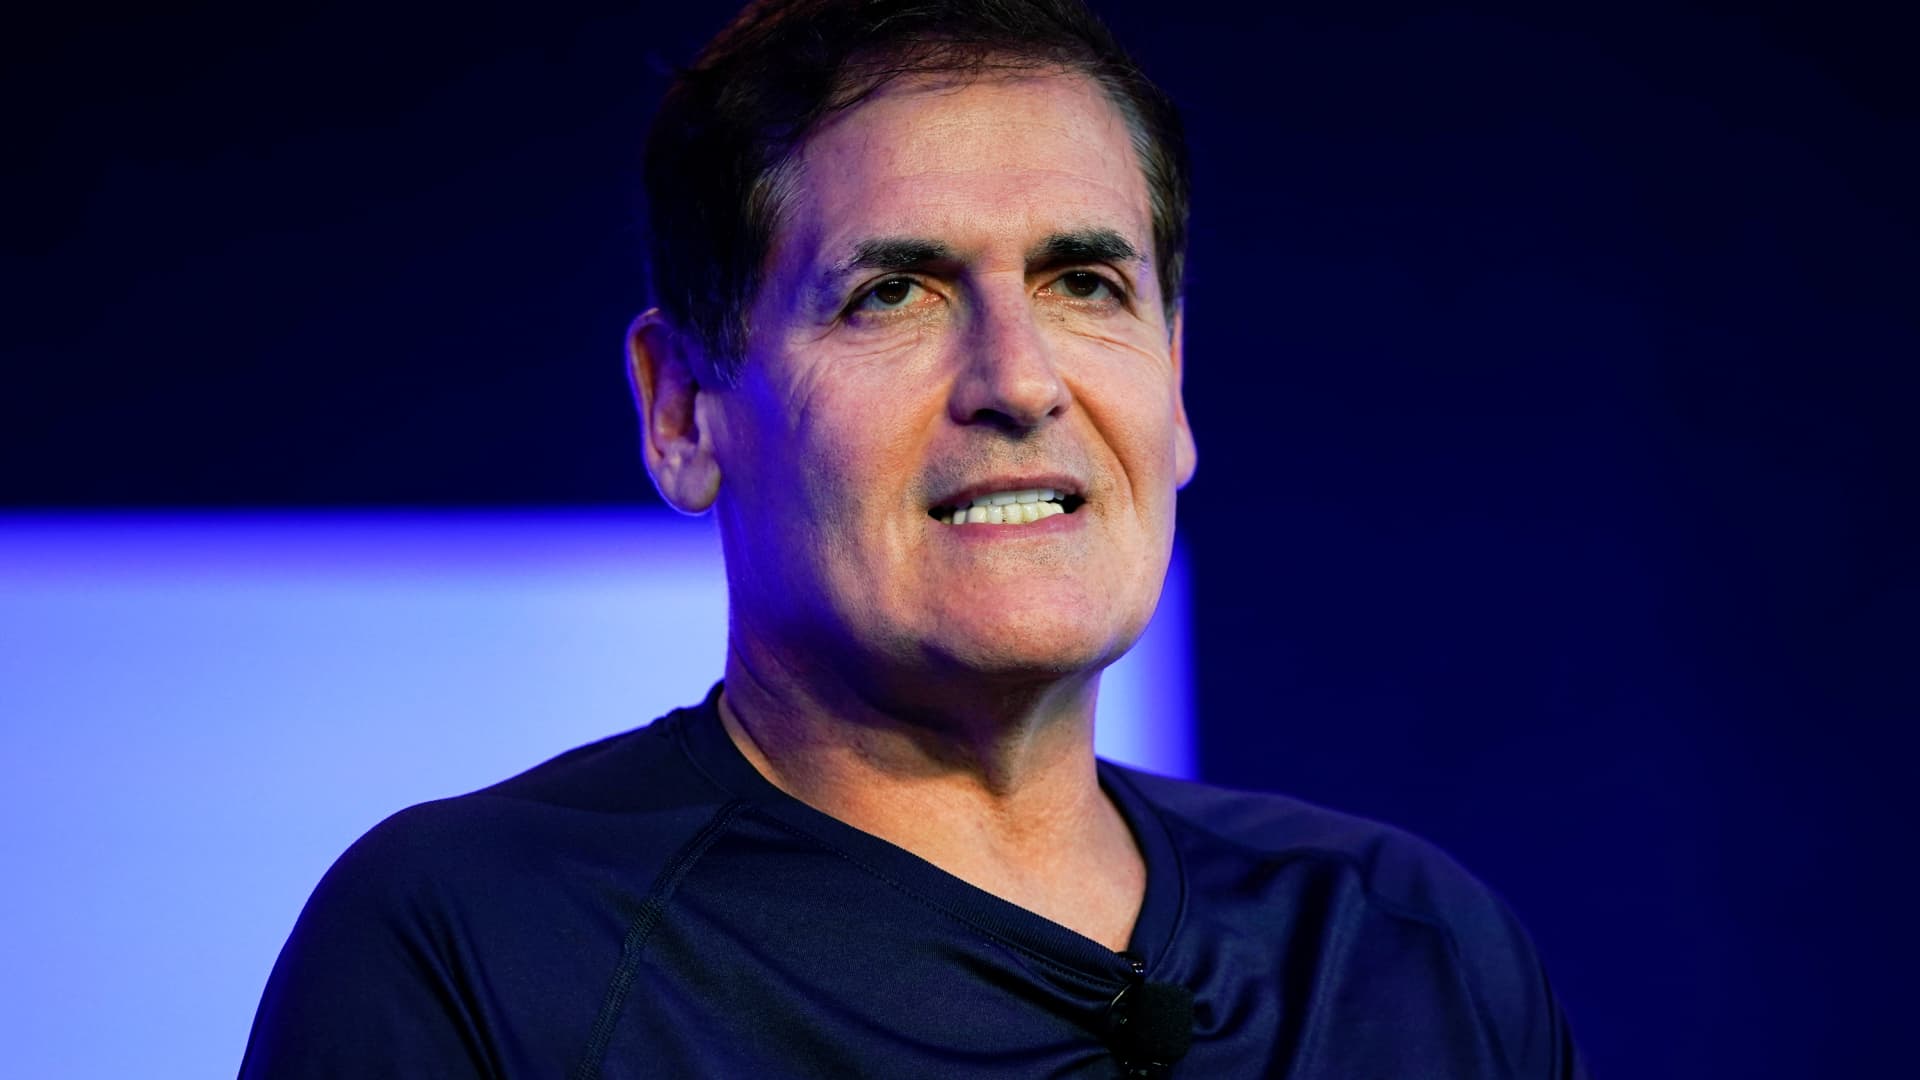 Mark Cuban: 'There is no quick fix' to systemic racism but white people 'need to change'